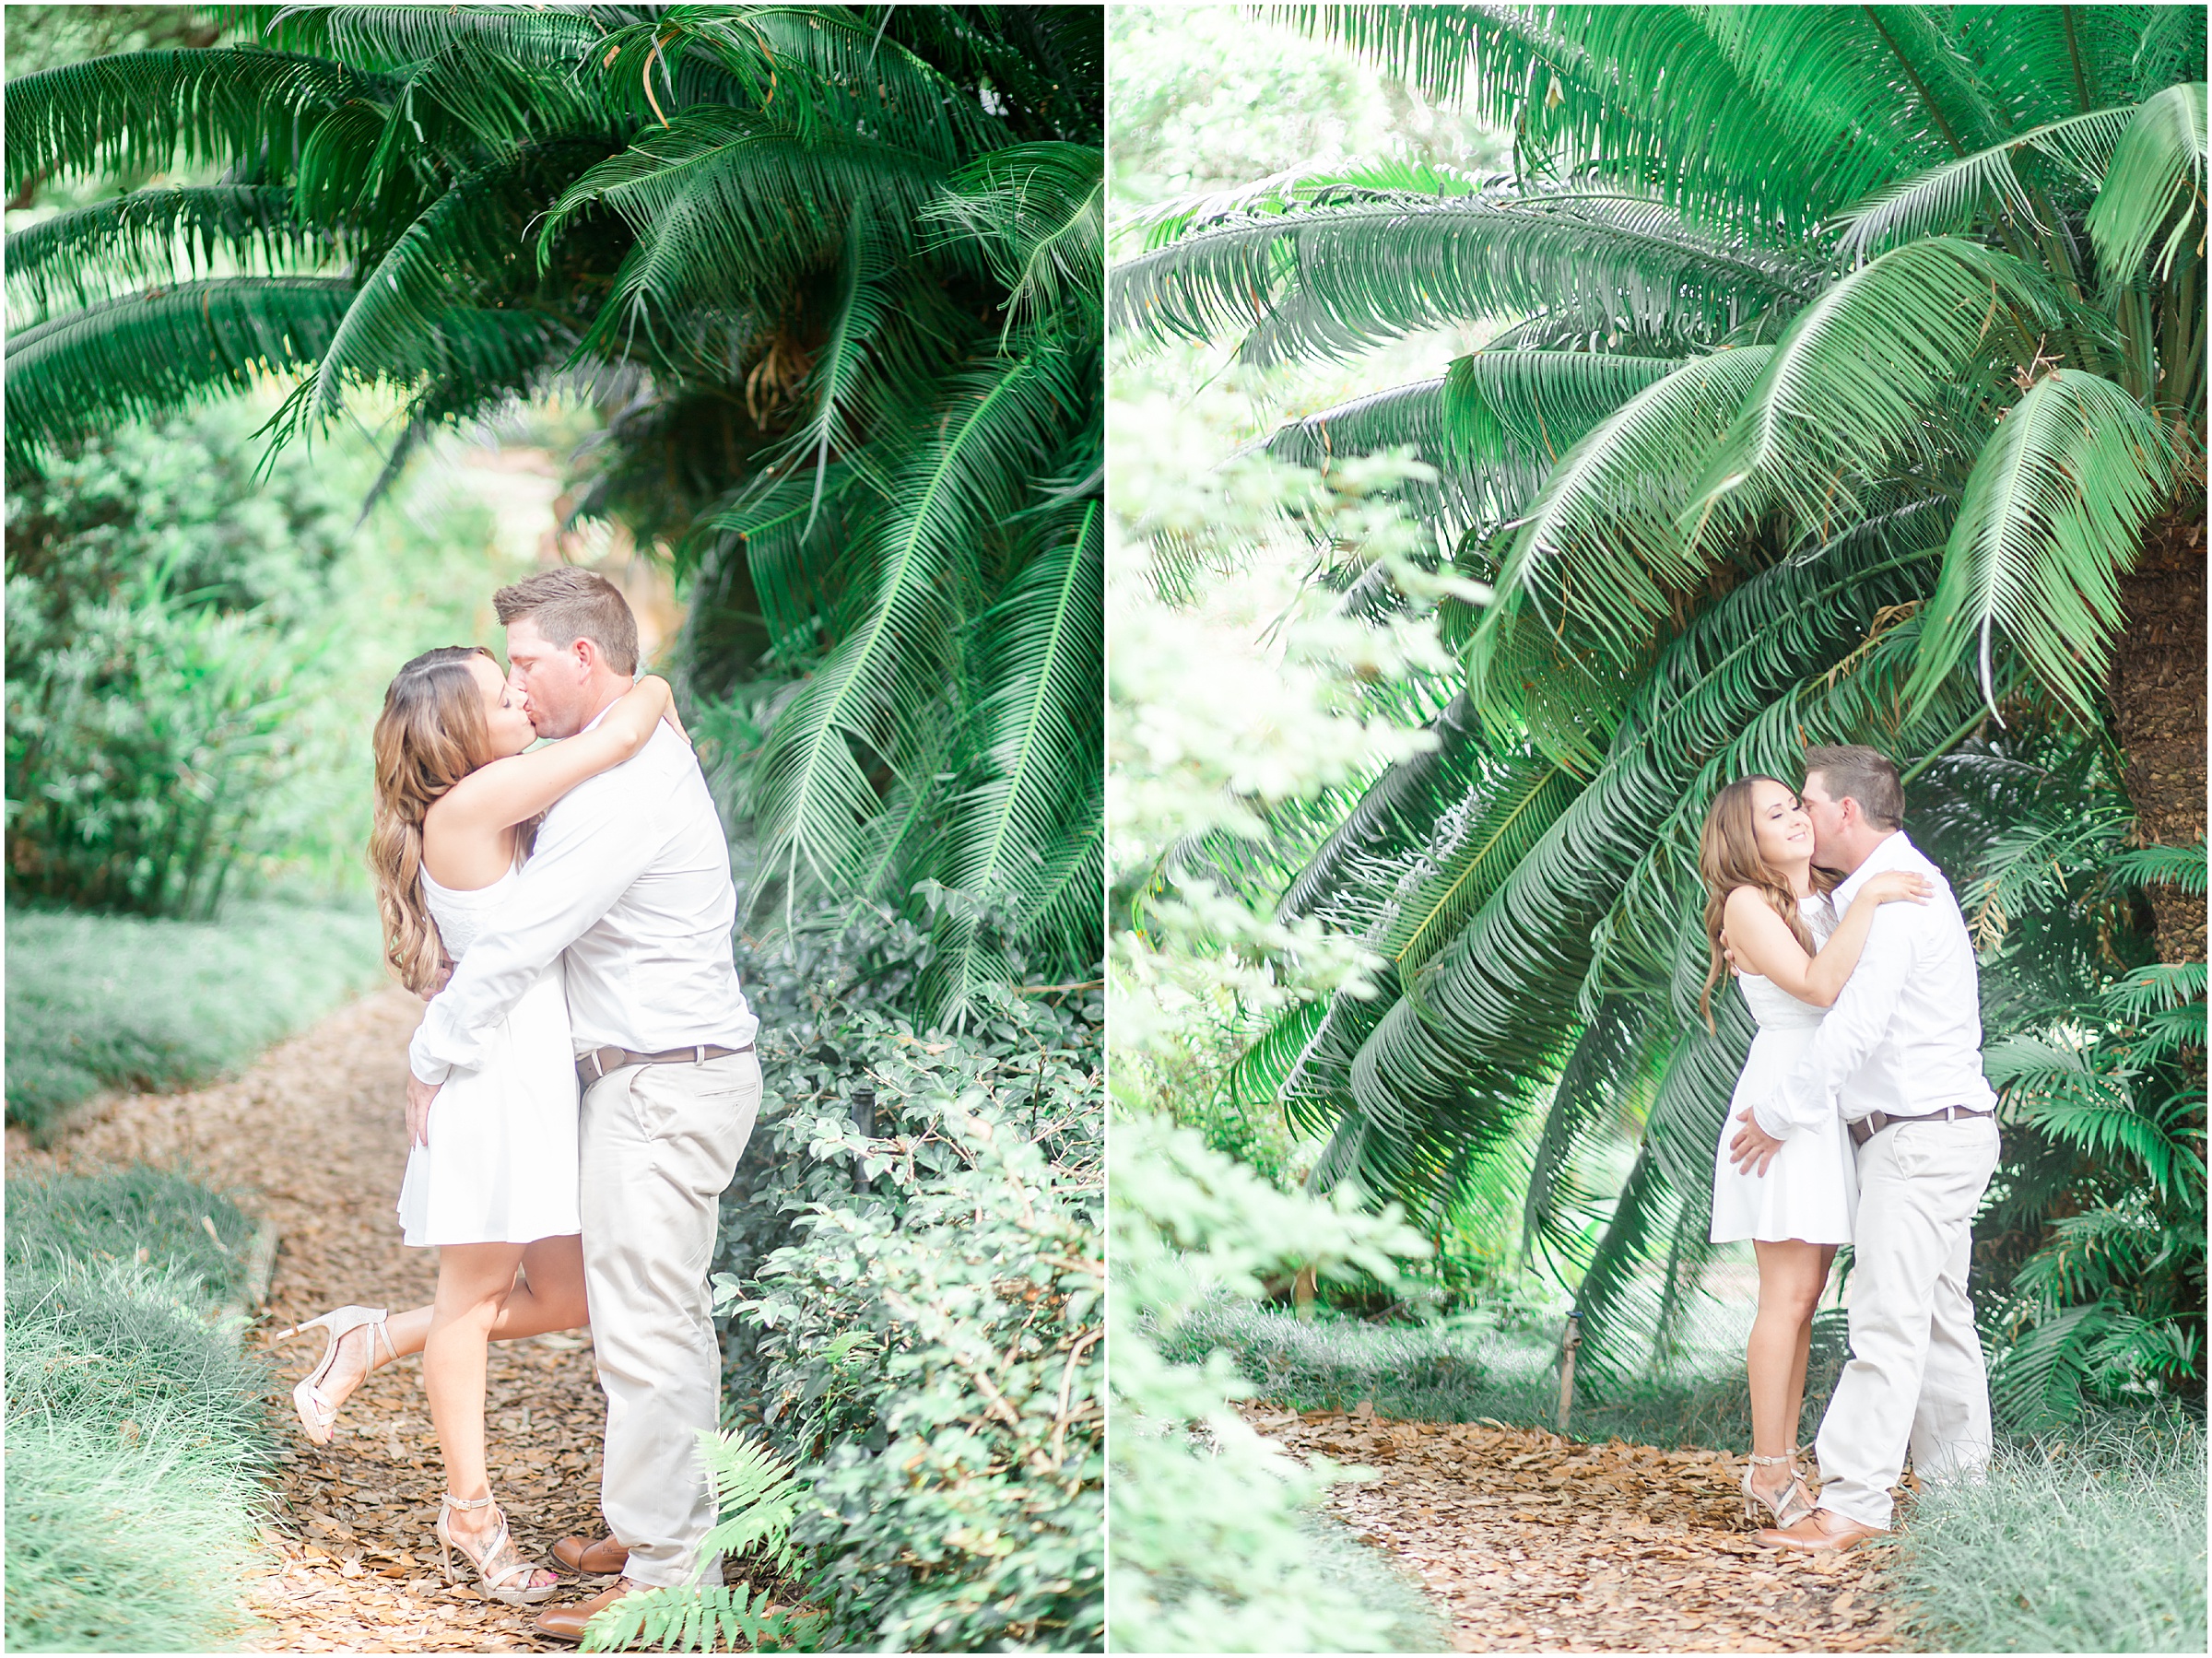 Jessica & Brad, newly engaged, at Bok Tower Gardens and Pinewood Estate in Lake Wales, Florida.